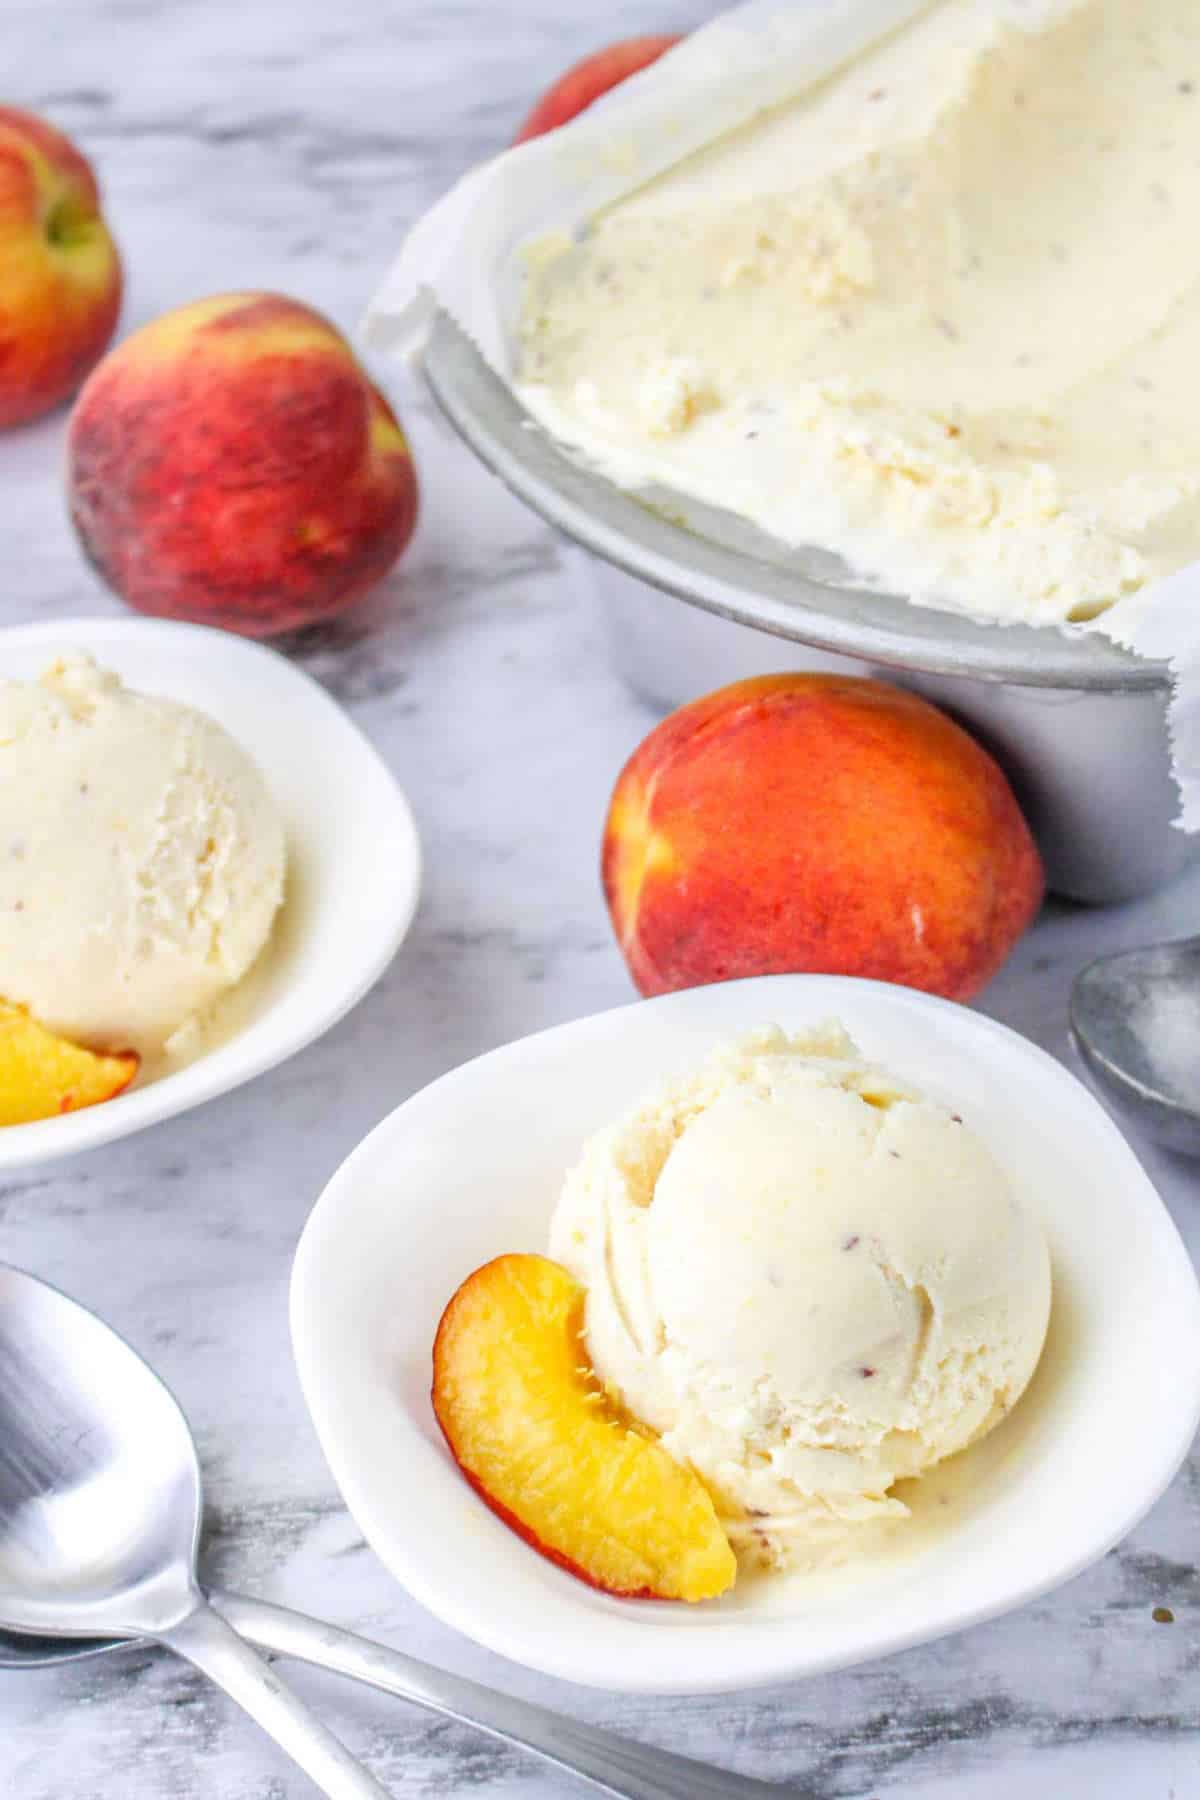 pan of chilled frozen dessert with peaches and scoops in bowls.